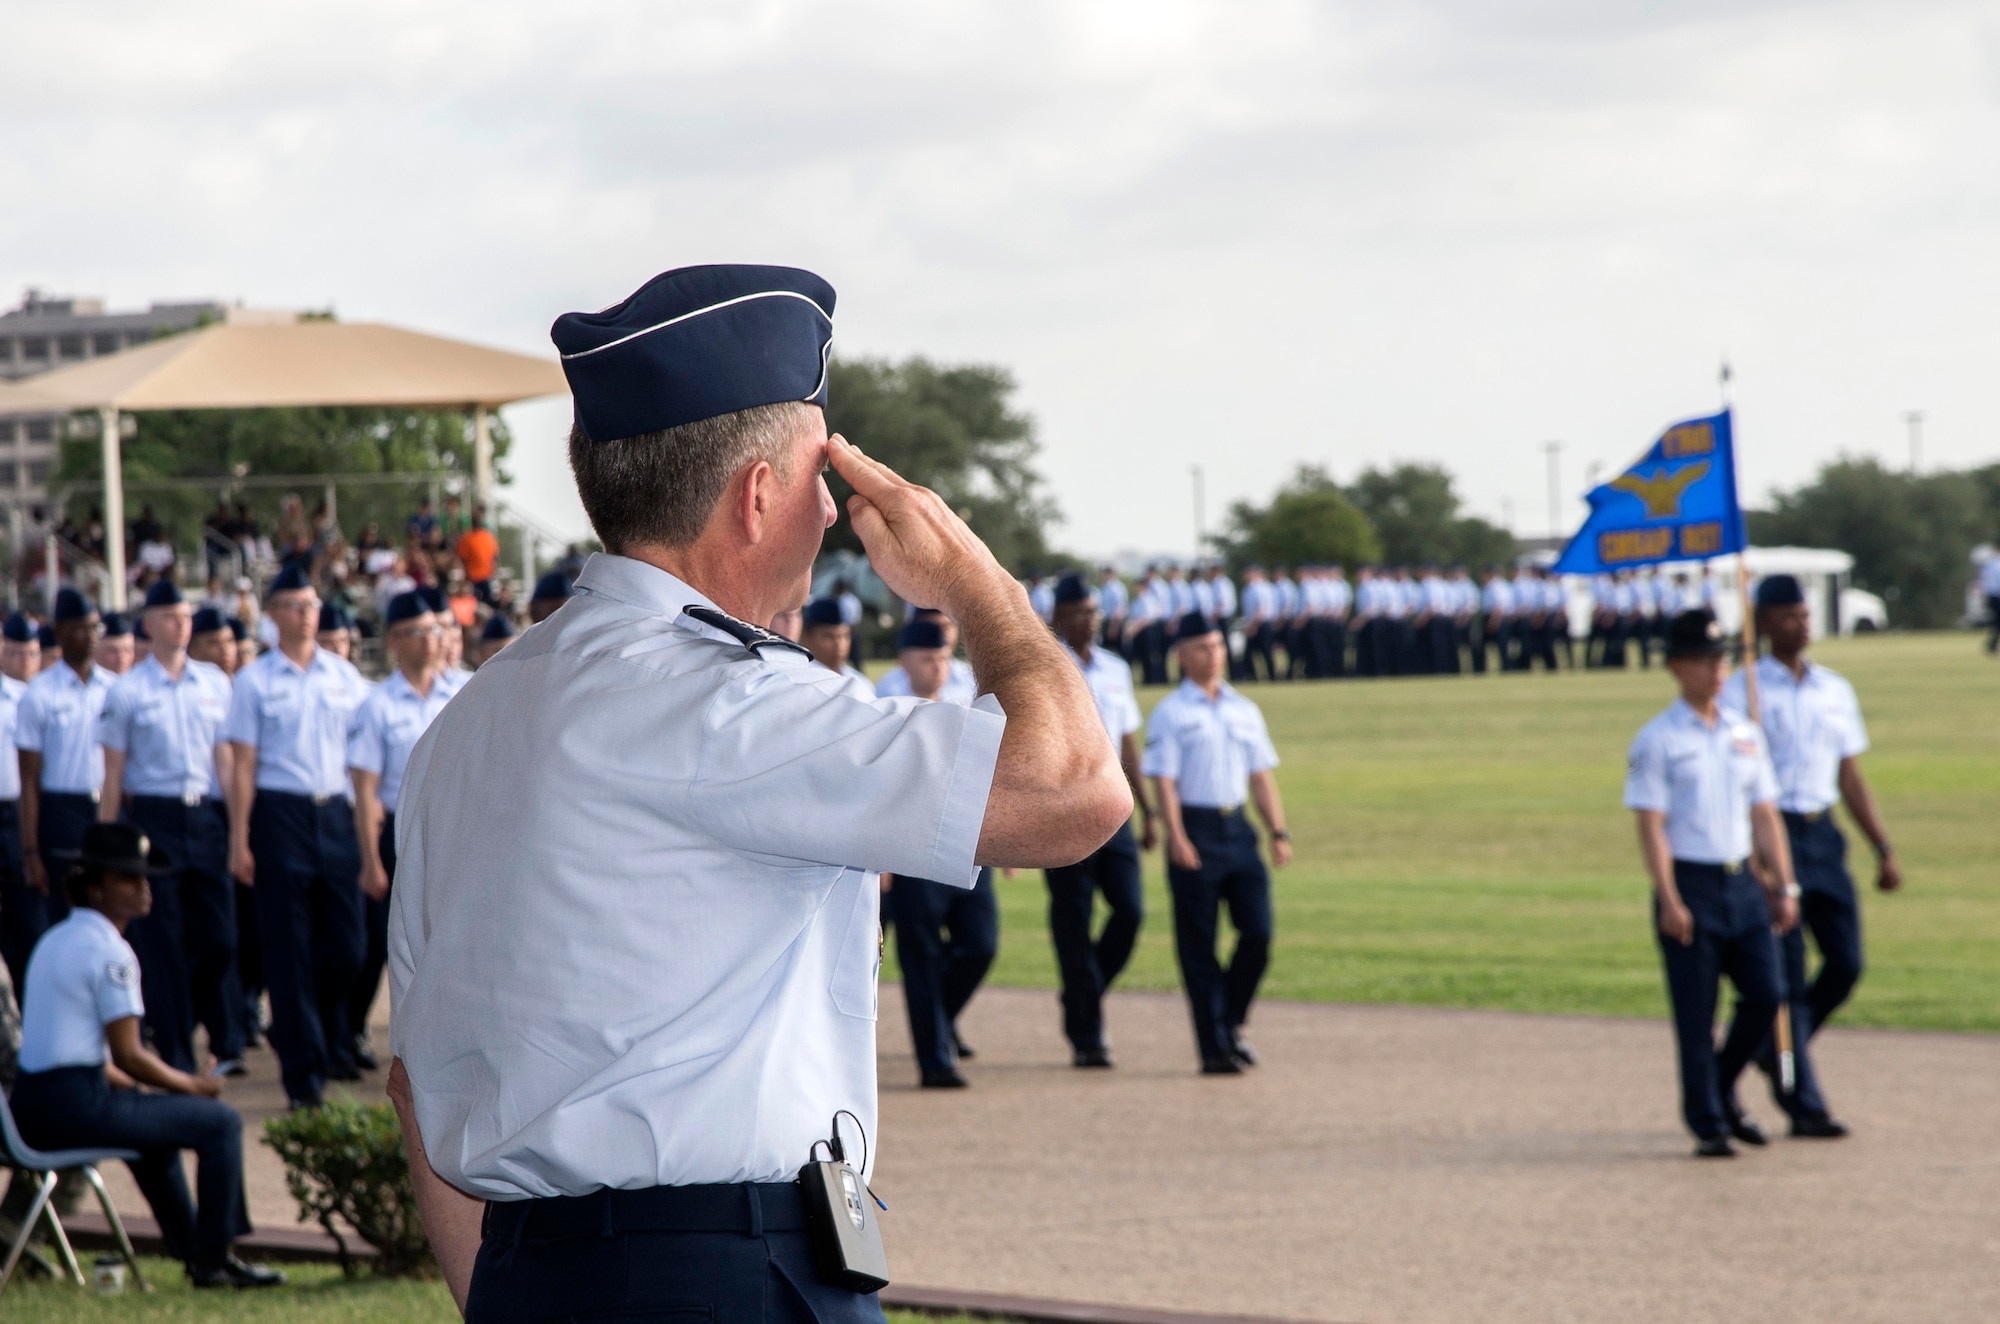 Air Force Chief of Staff Gen. David Goldfein salutes a flight of the Air Force's newest Airmen June 16, 2017, at Joint Base San Antonio-Lackland. Goldfein toured various JBSA-Lackland facilities and met many 37th Training Wing Airmen during his two-day visit. Every enlisted Airmen begins their Air Force career at basic military training. JBSA-Lackland is often referred to as the "Gateway to the Air Force," graduating about 39,000 Airmen annually. Basic military training is one of the missions of the 37th Training Wing, the largest training wing in the United States Air Force. (U.S. Air Force photo by Johnny Saldivar)